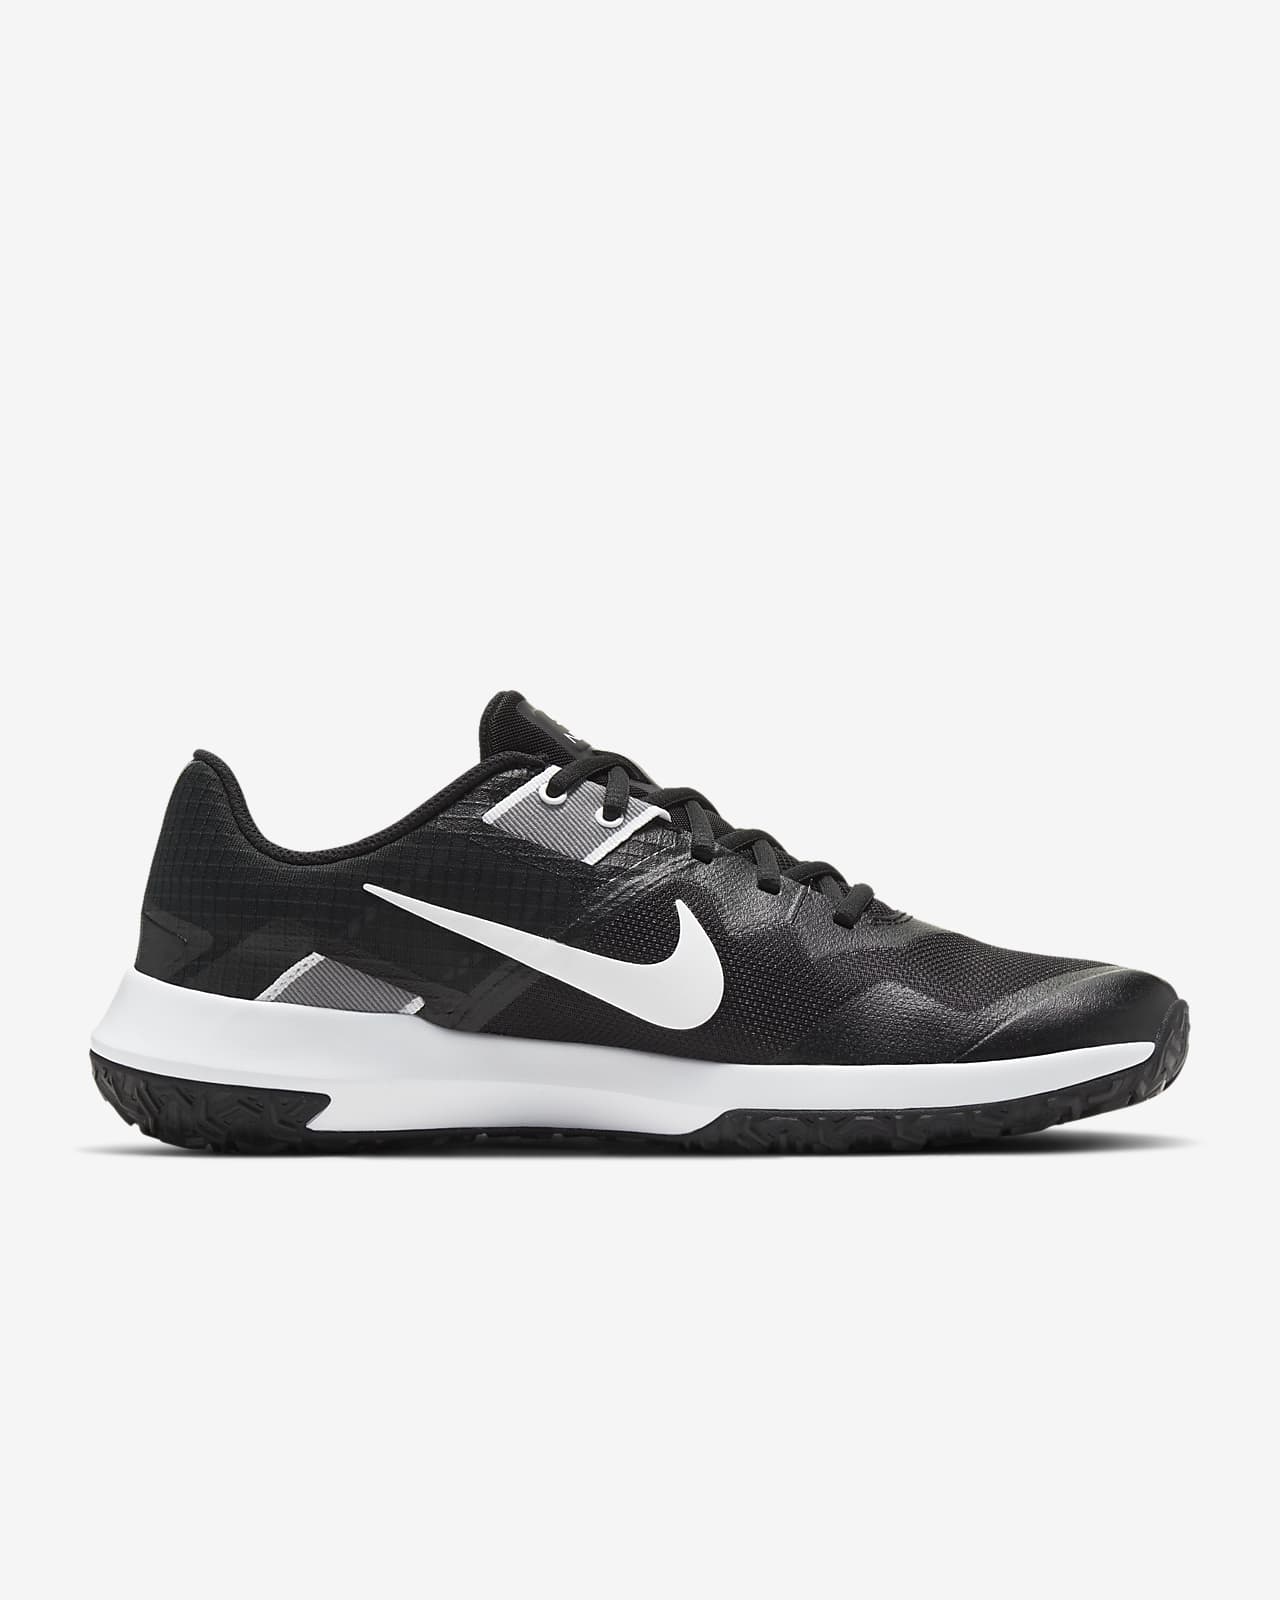 nike varsity compete tr 2 extra wide